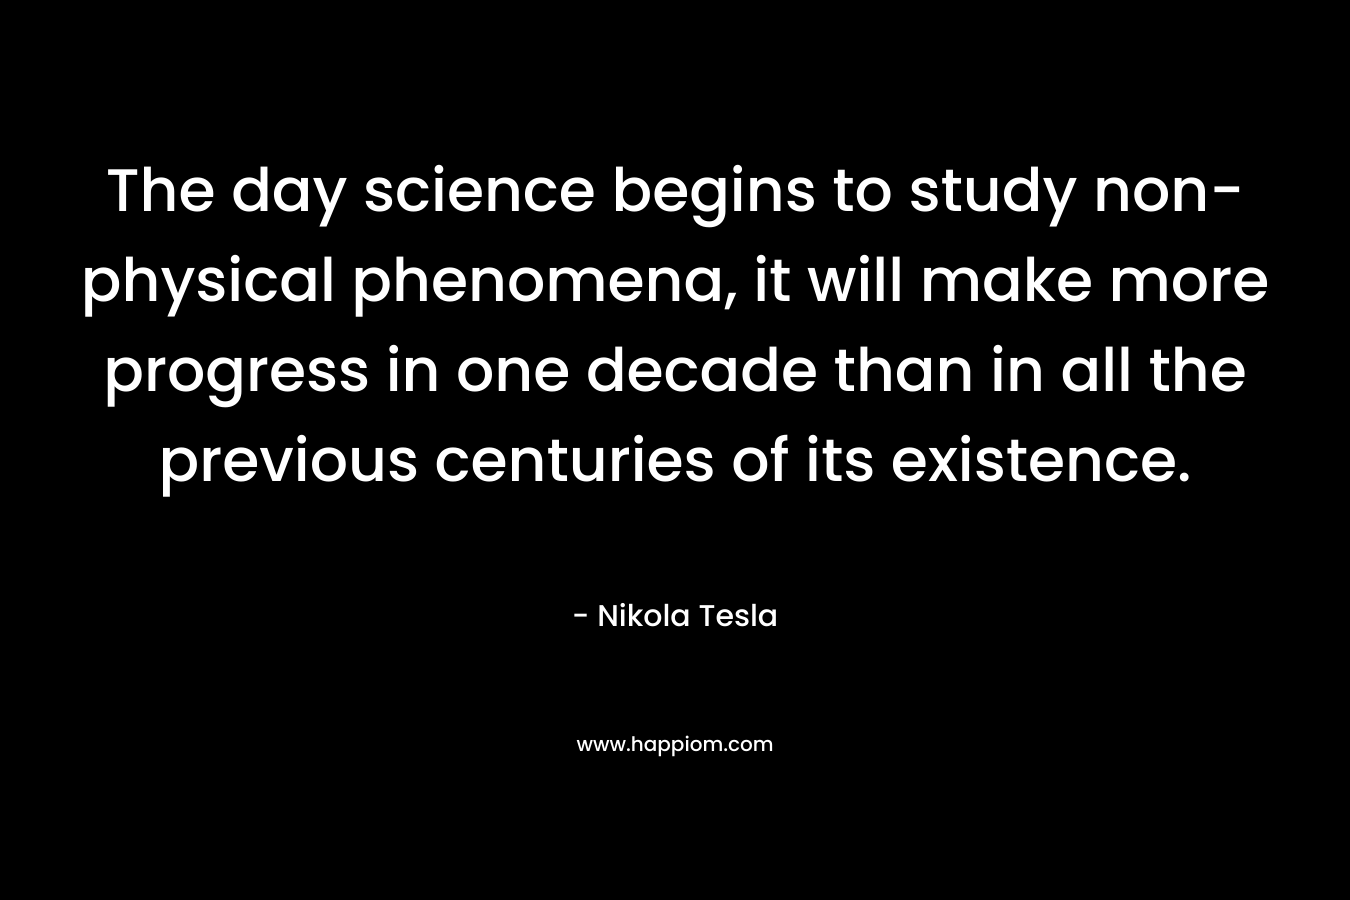 The day science begins to study non-physical phenomena, it will make more progress in one decade than in all the previous centuries of its existence.